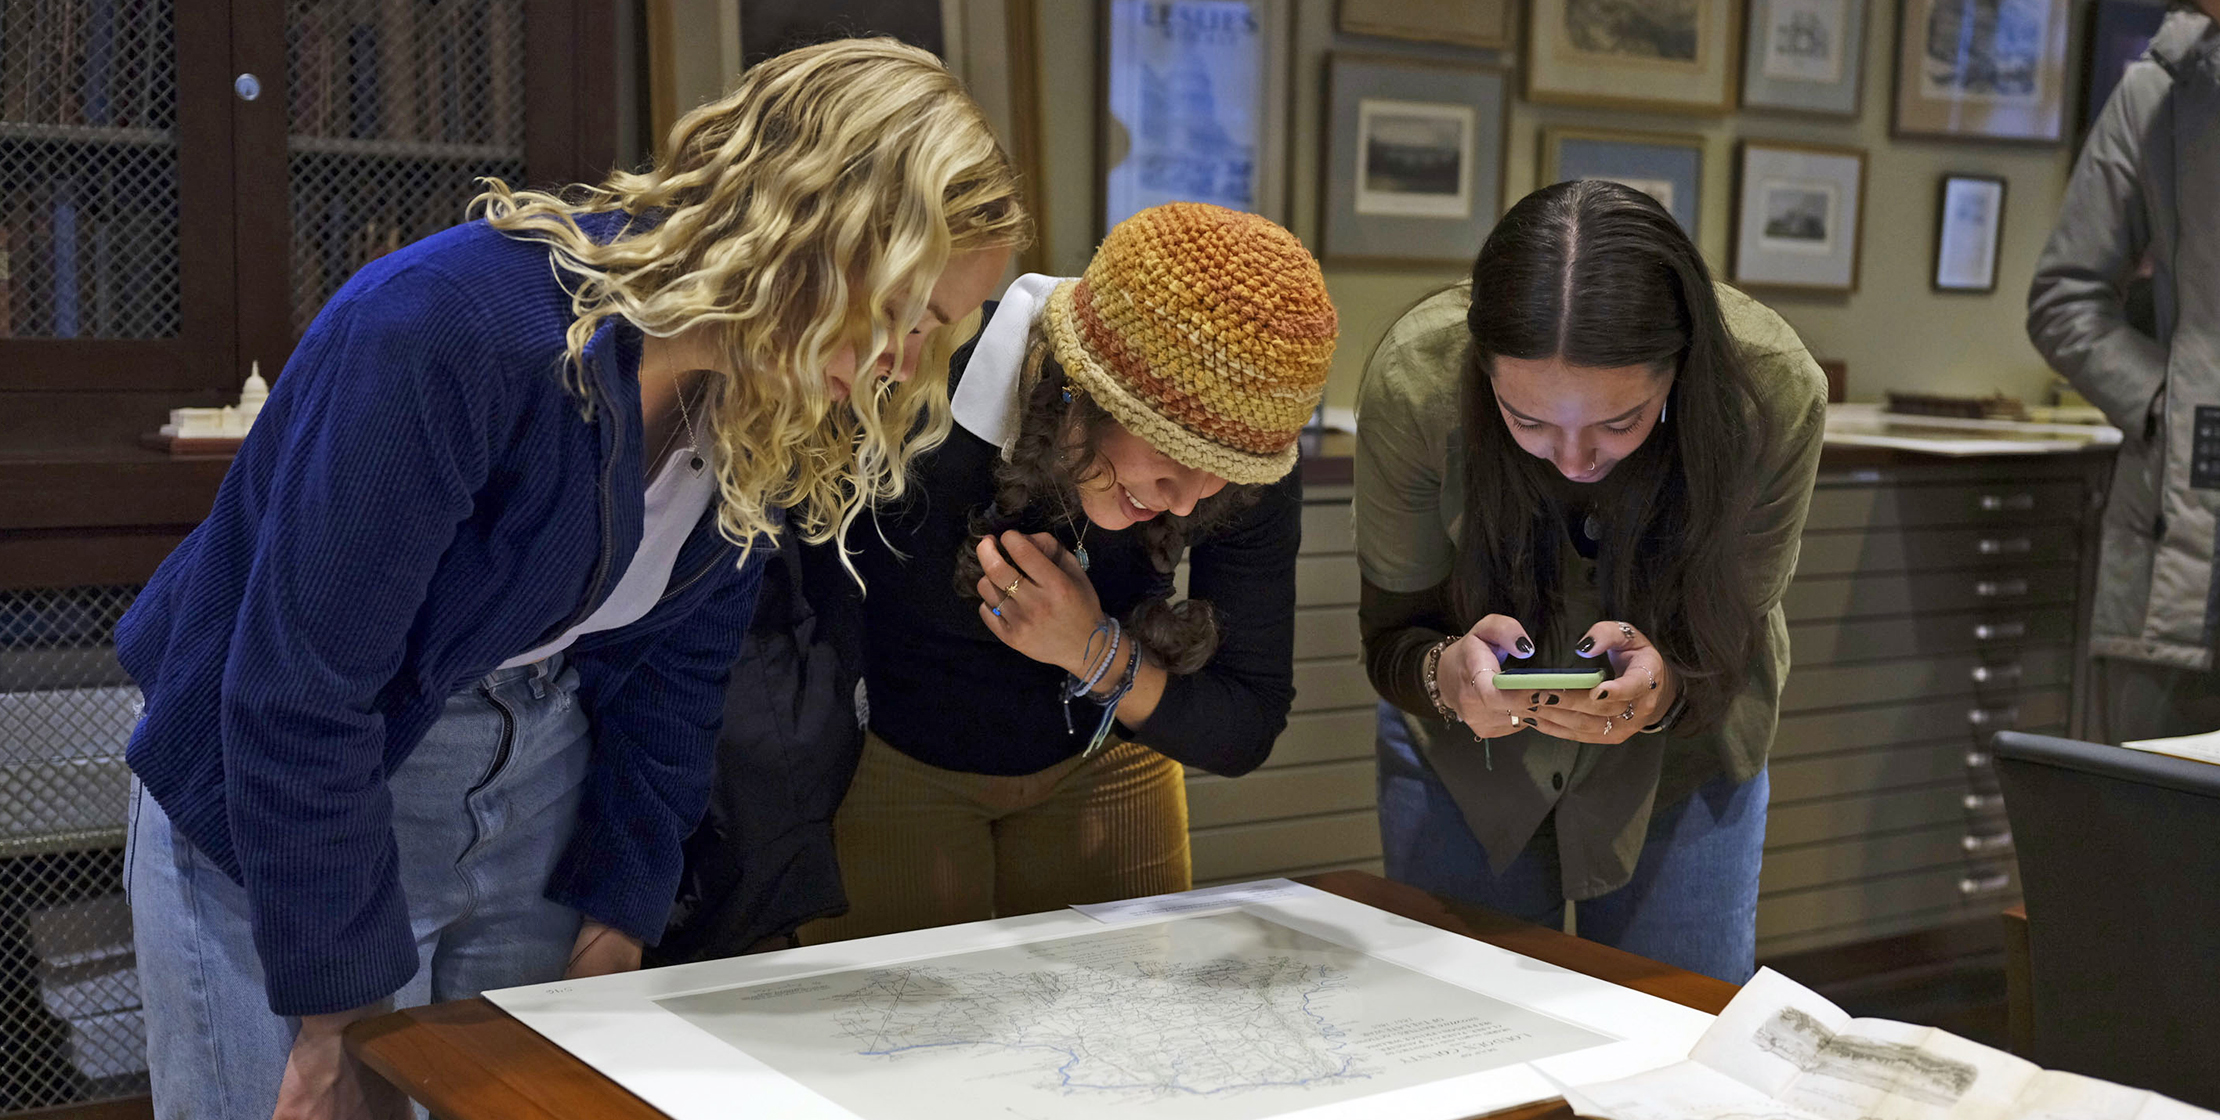 Three students examine a map from the collection 